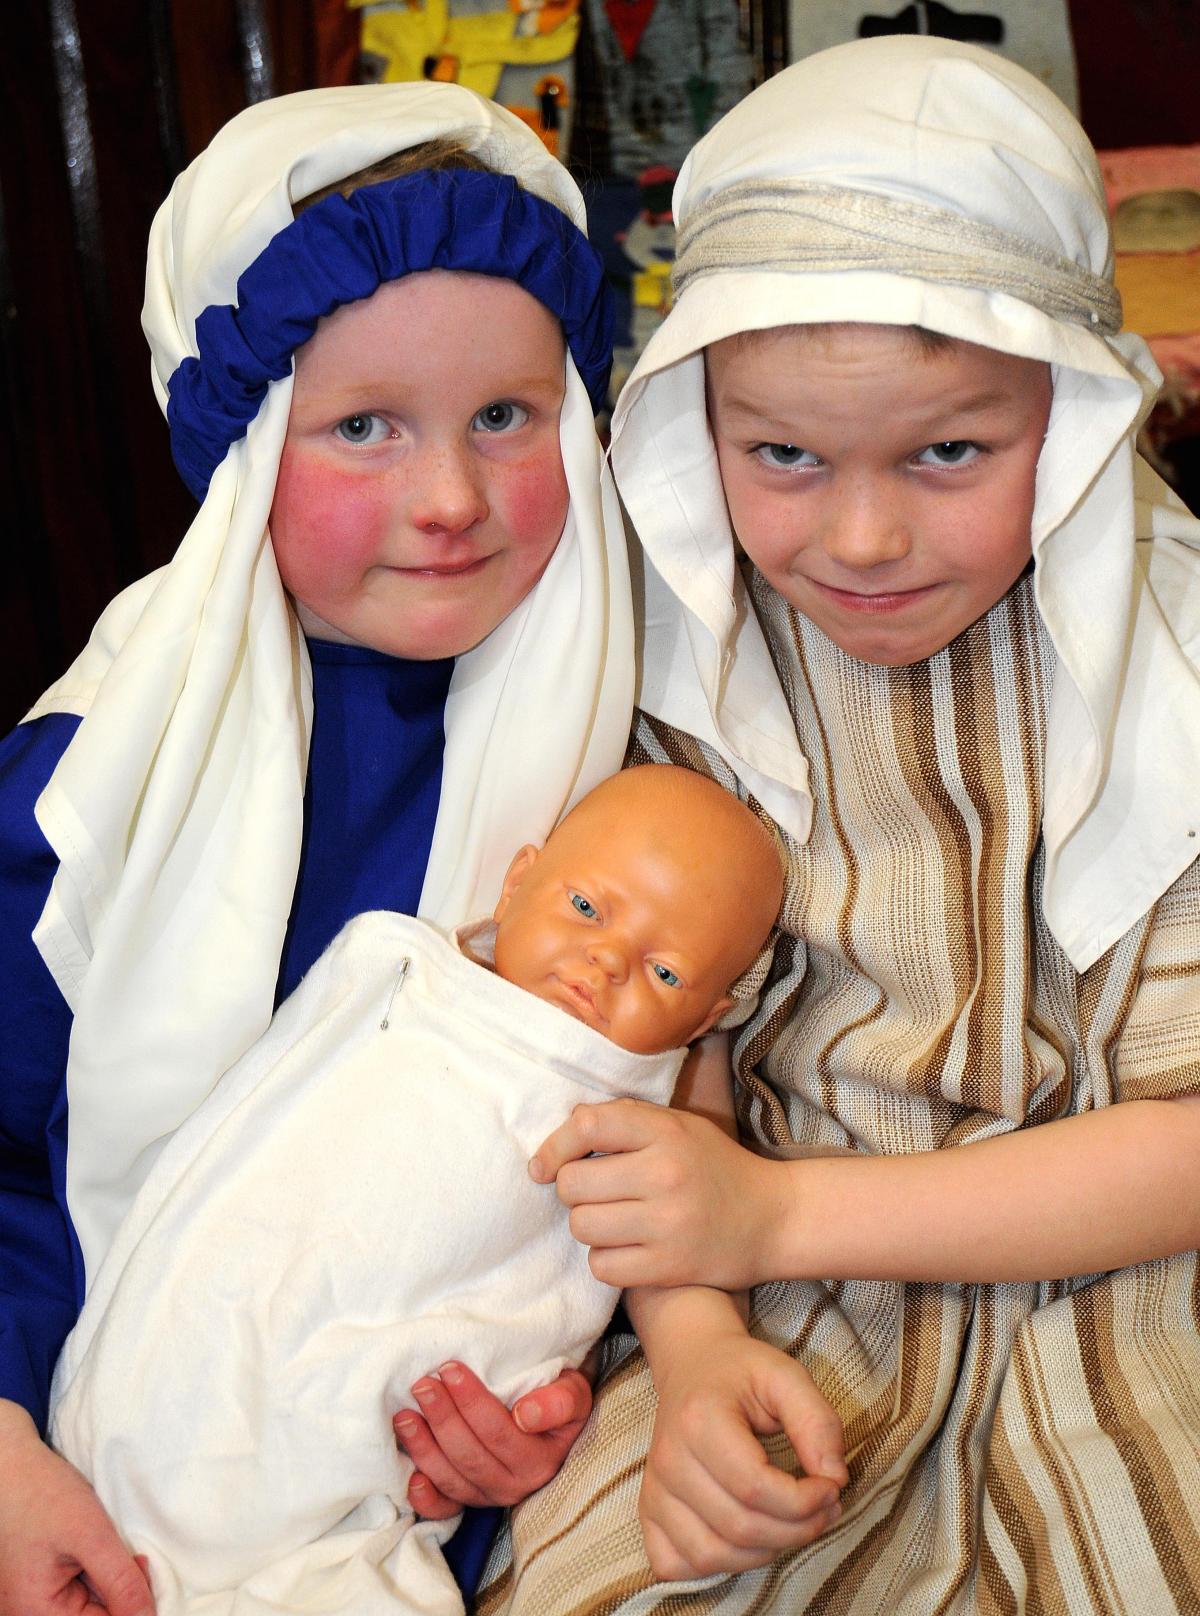 Appearing in Guiseley Primary School Nativity were Charis Gill and Thomas Hird as Mary and Joseph